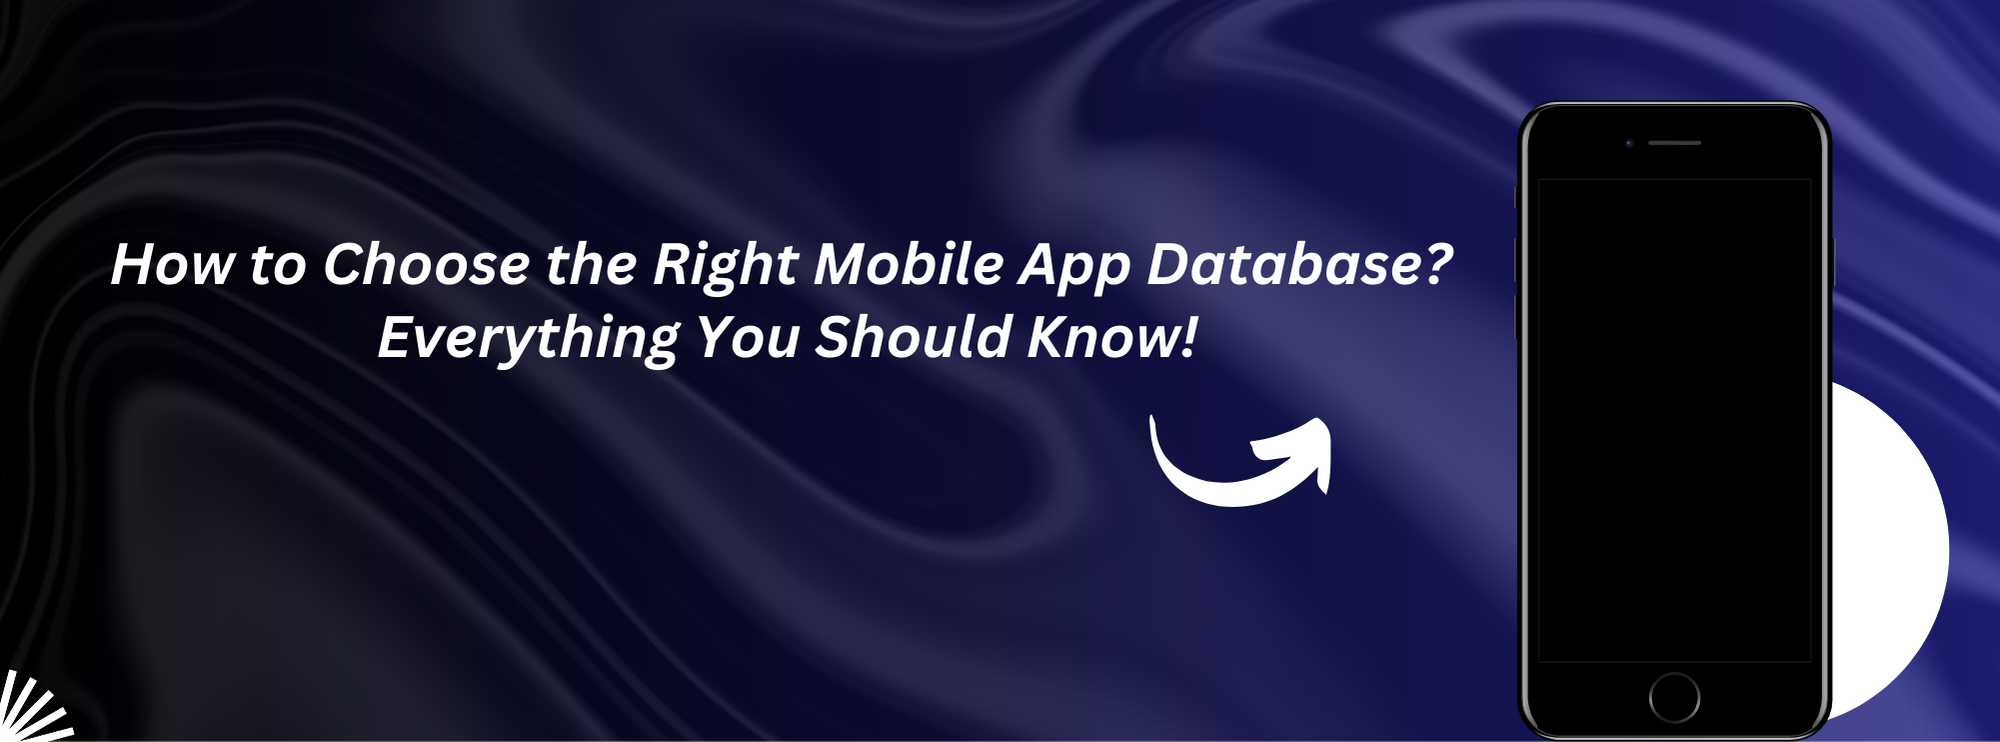 How to Choose the Right Mobile App Database? Everything You Should Know!